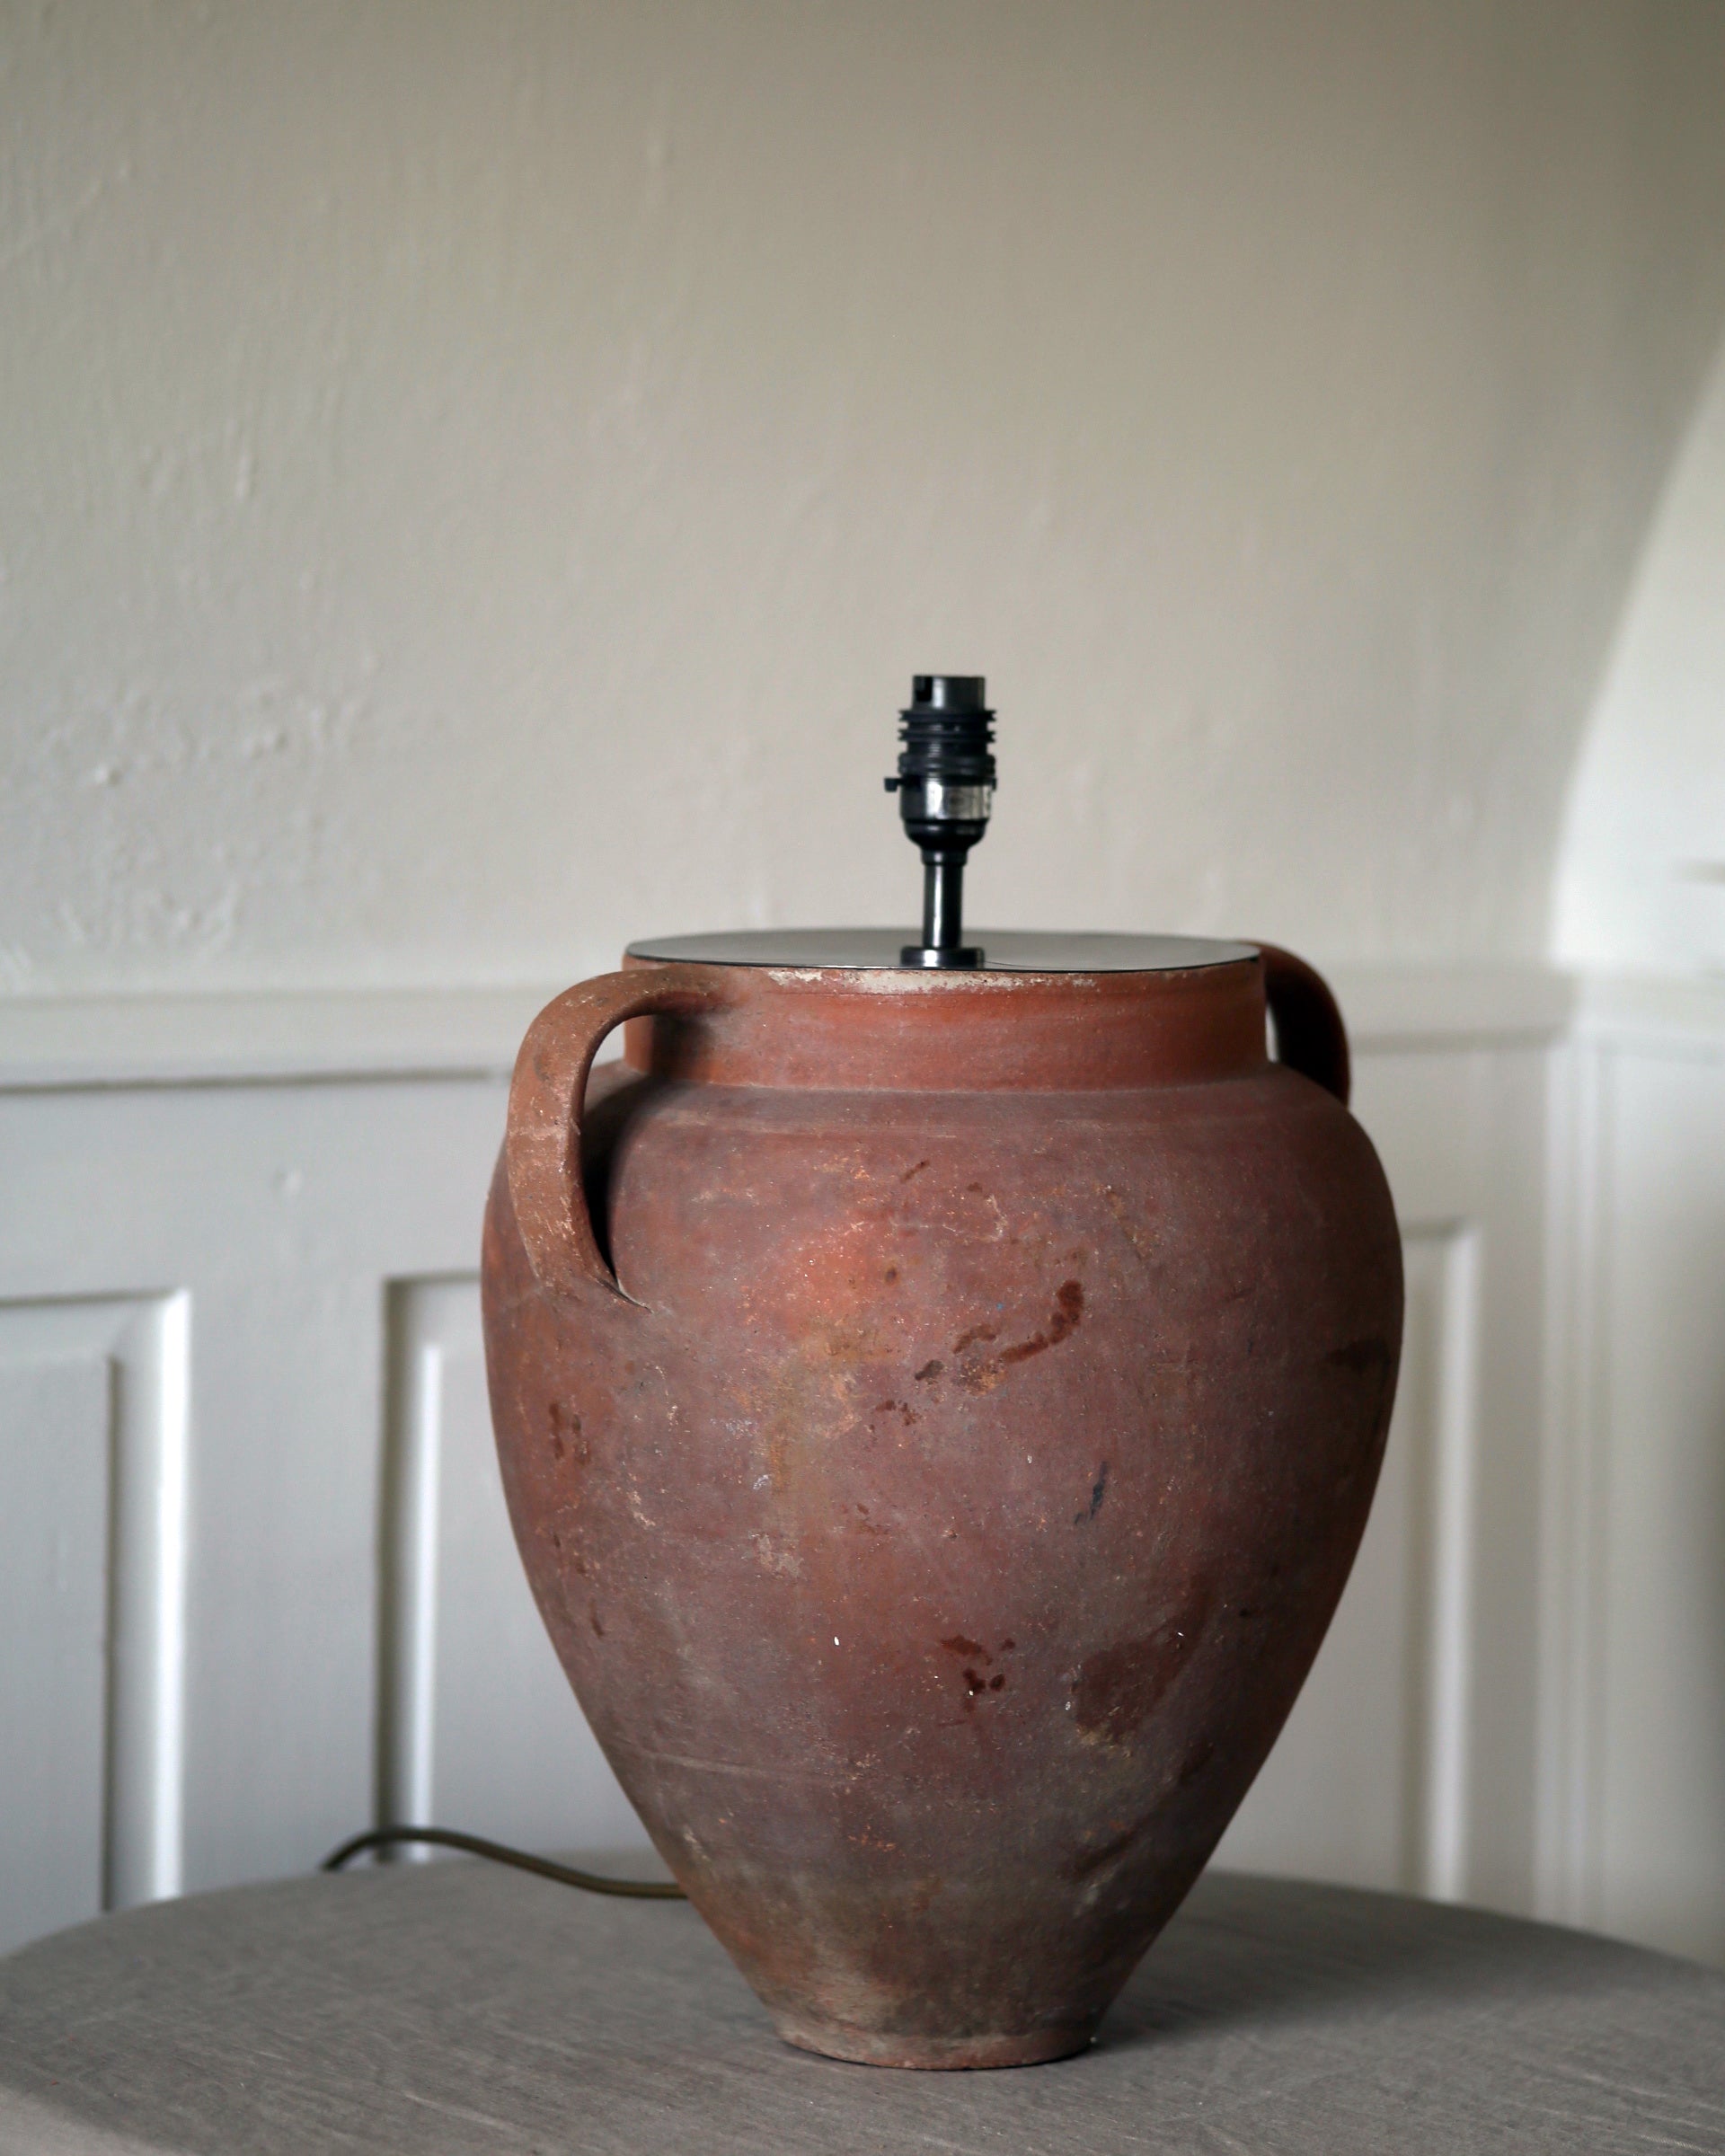 Antique authentically aged patina of terracotta pot surface and brassware light fittings